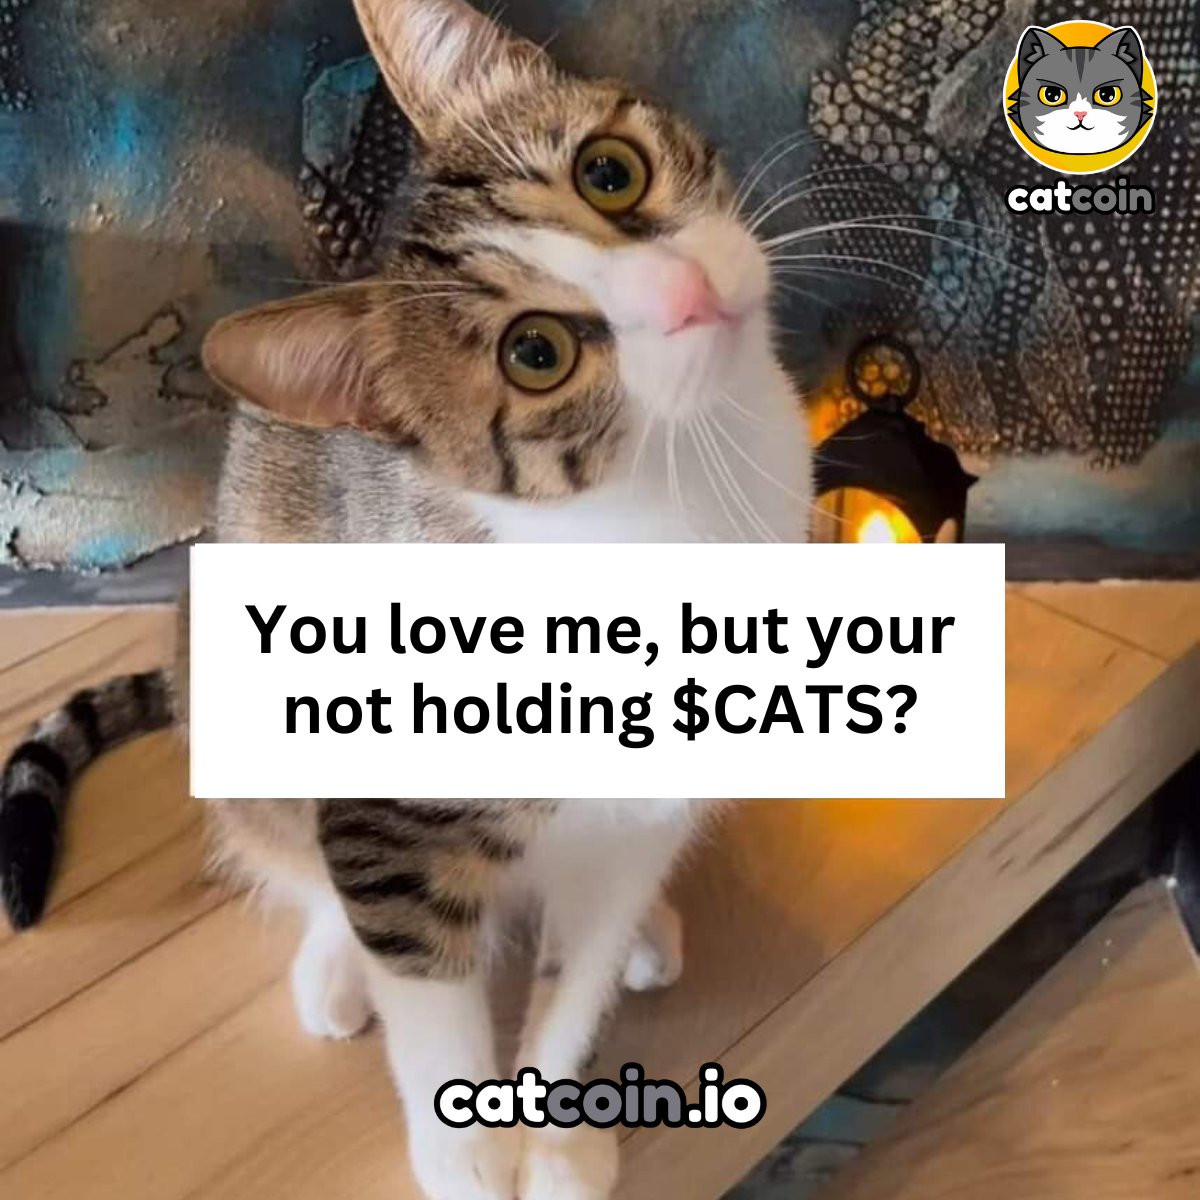 Don't confuse your furry loved ones. Hold $CATS and go #tothemeoown. 

#Catcoin